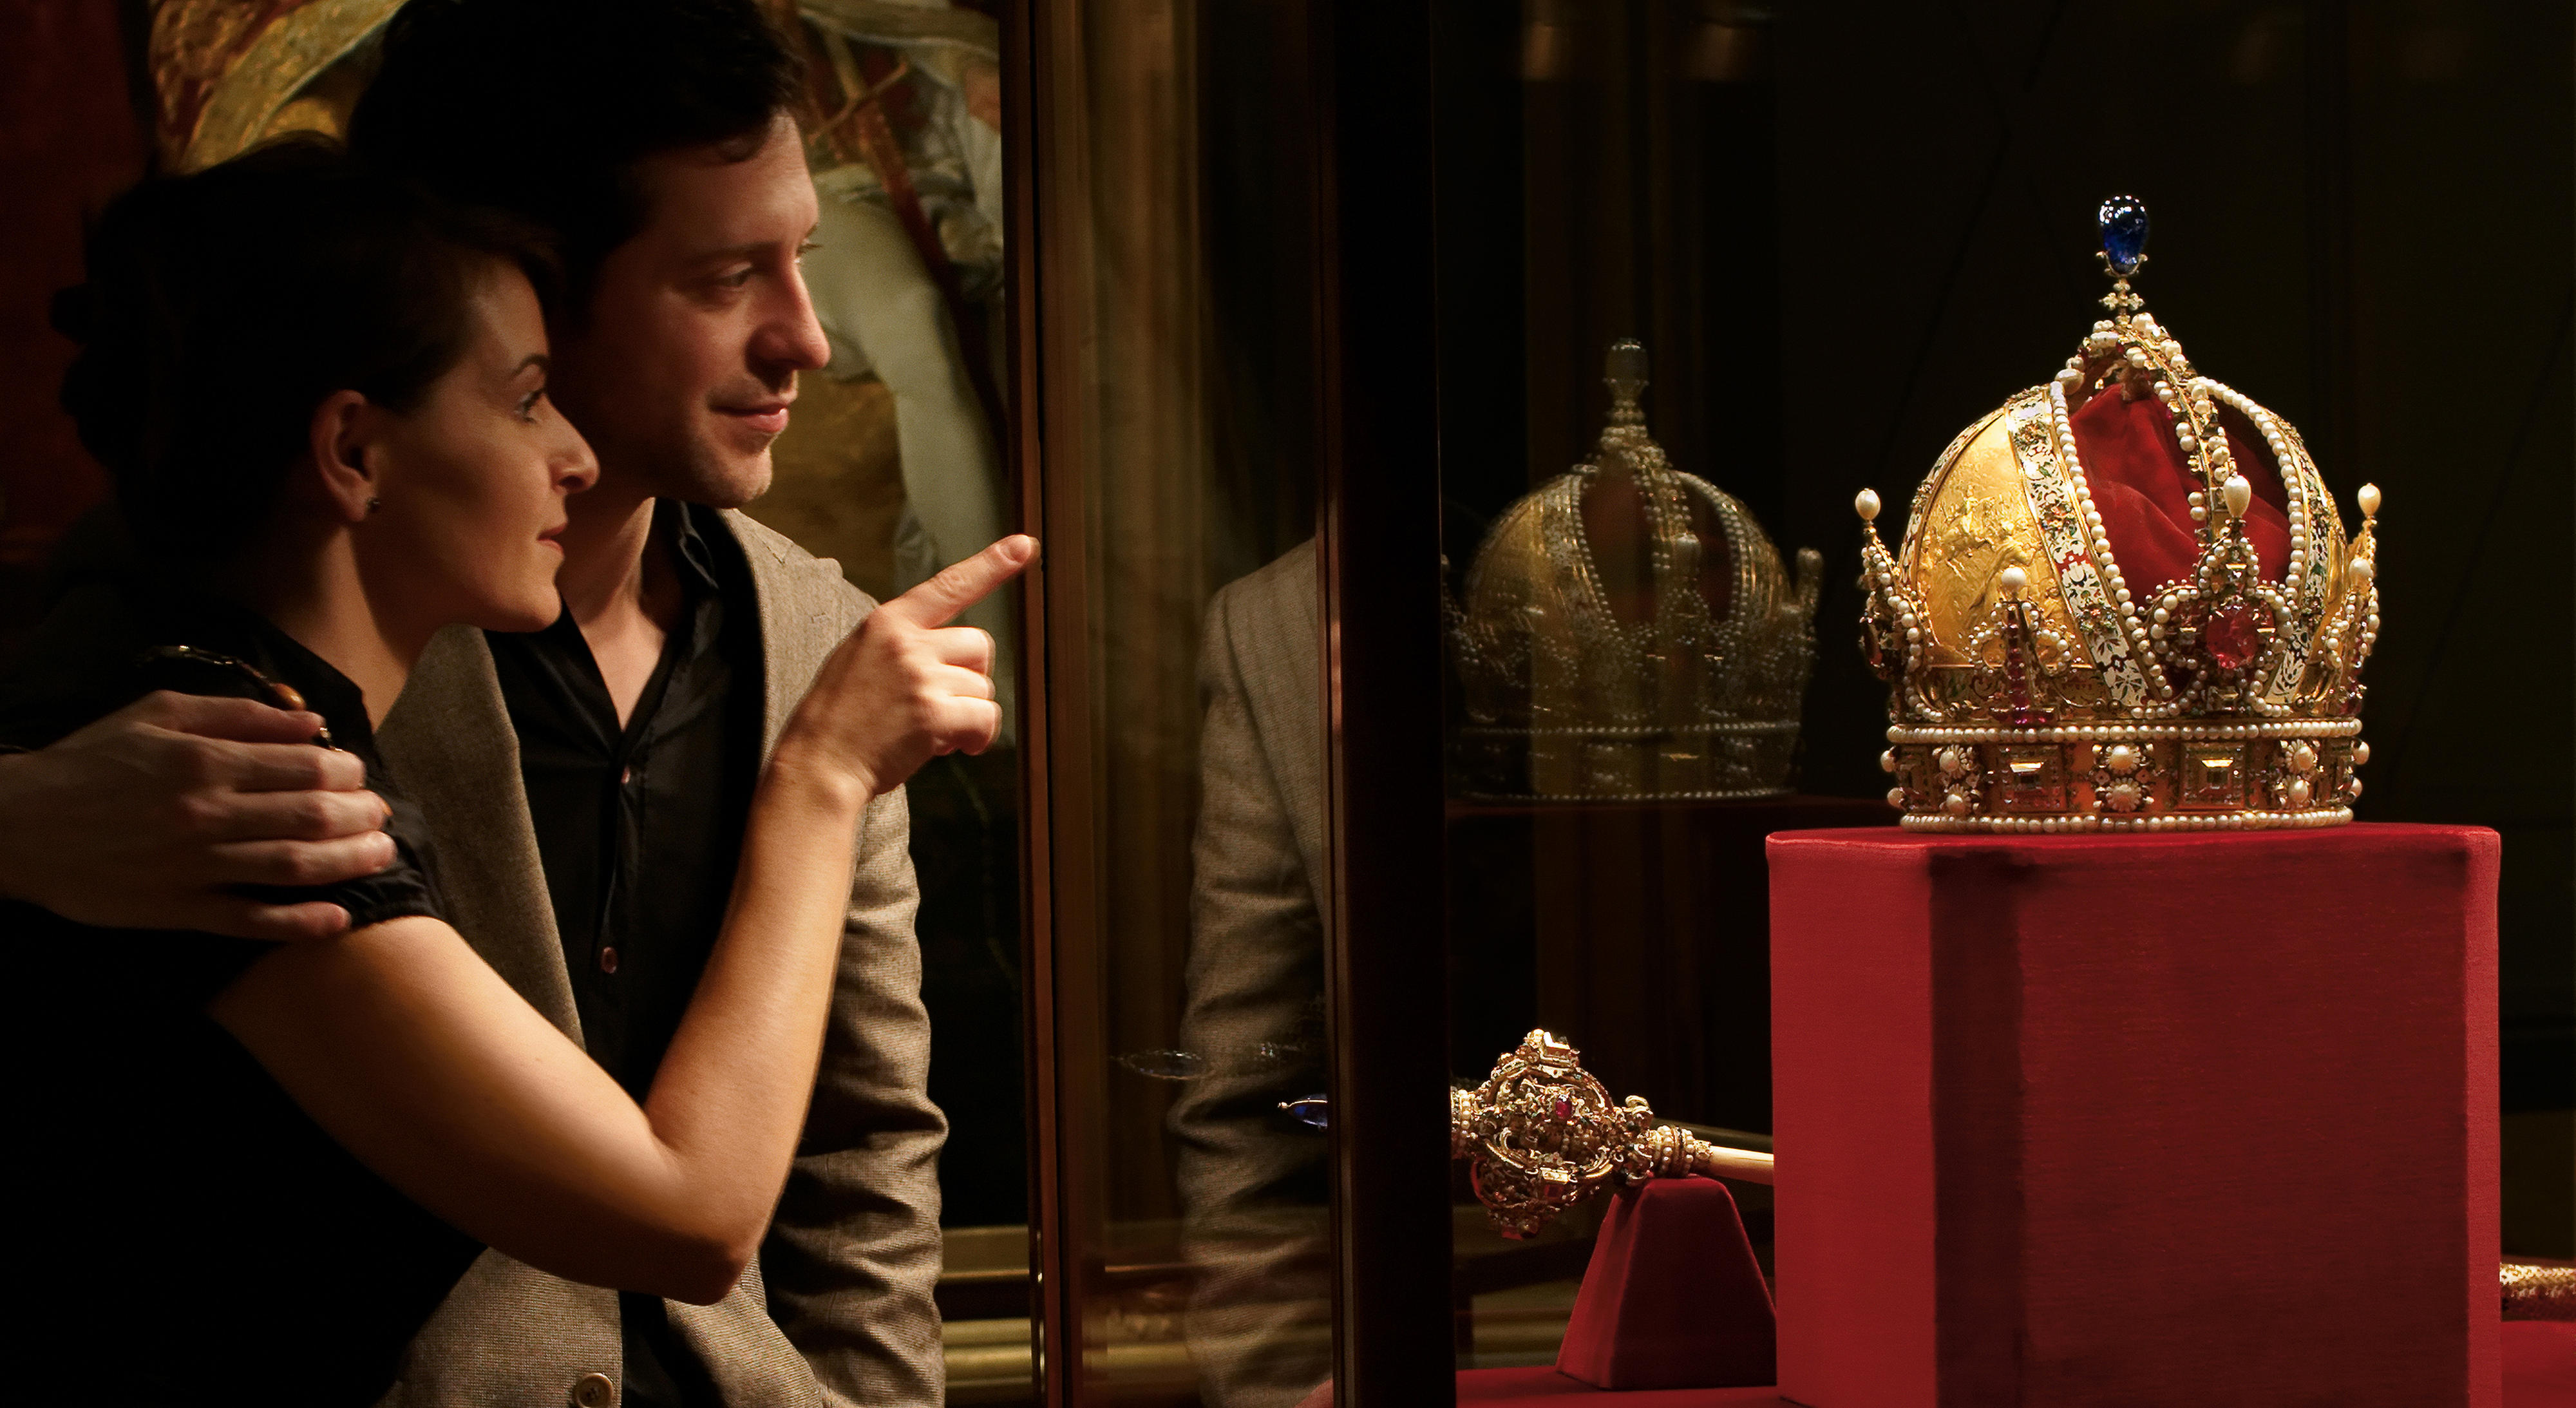 A couple in the Imperial Treasury in front of the Rudolfskrone